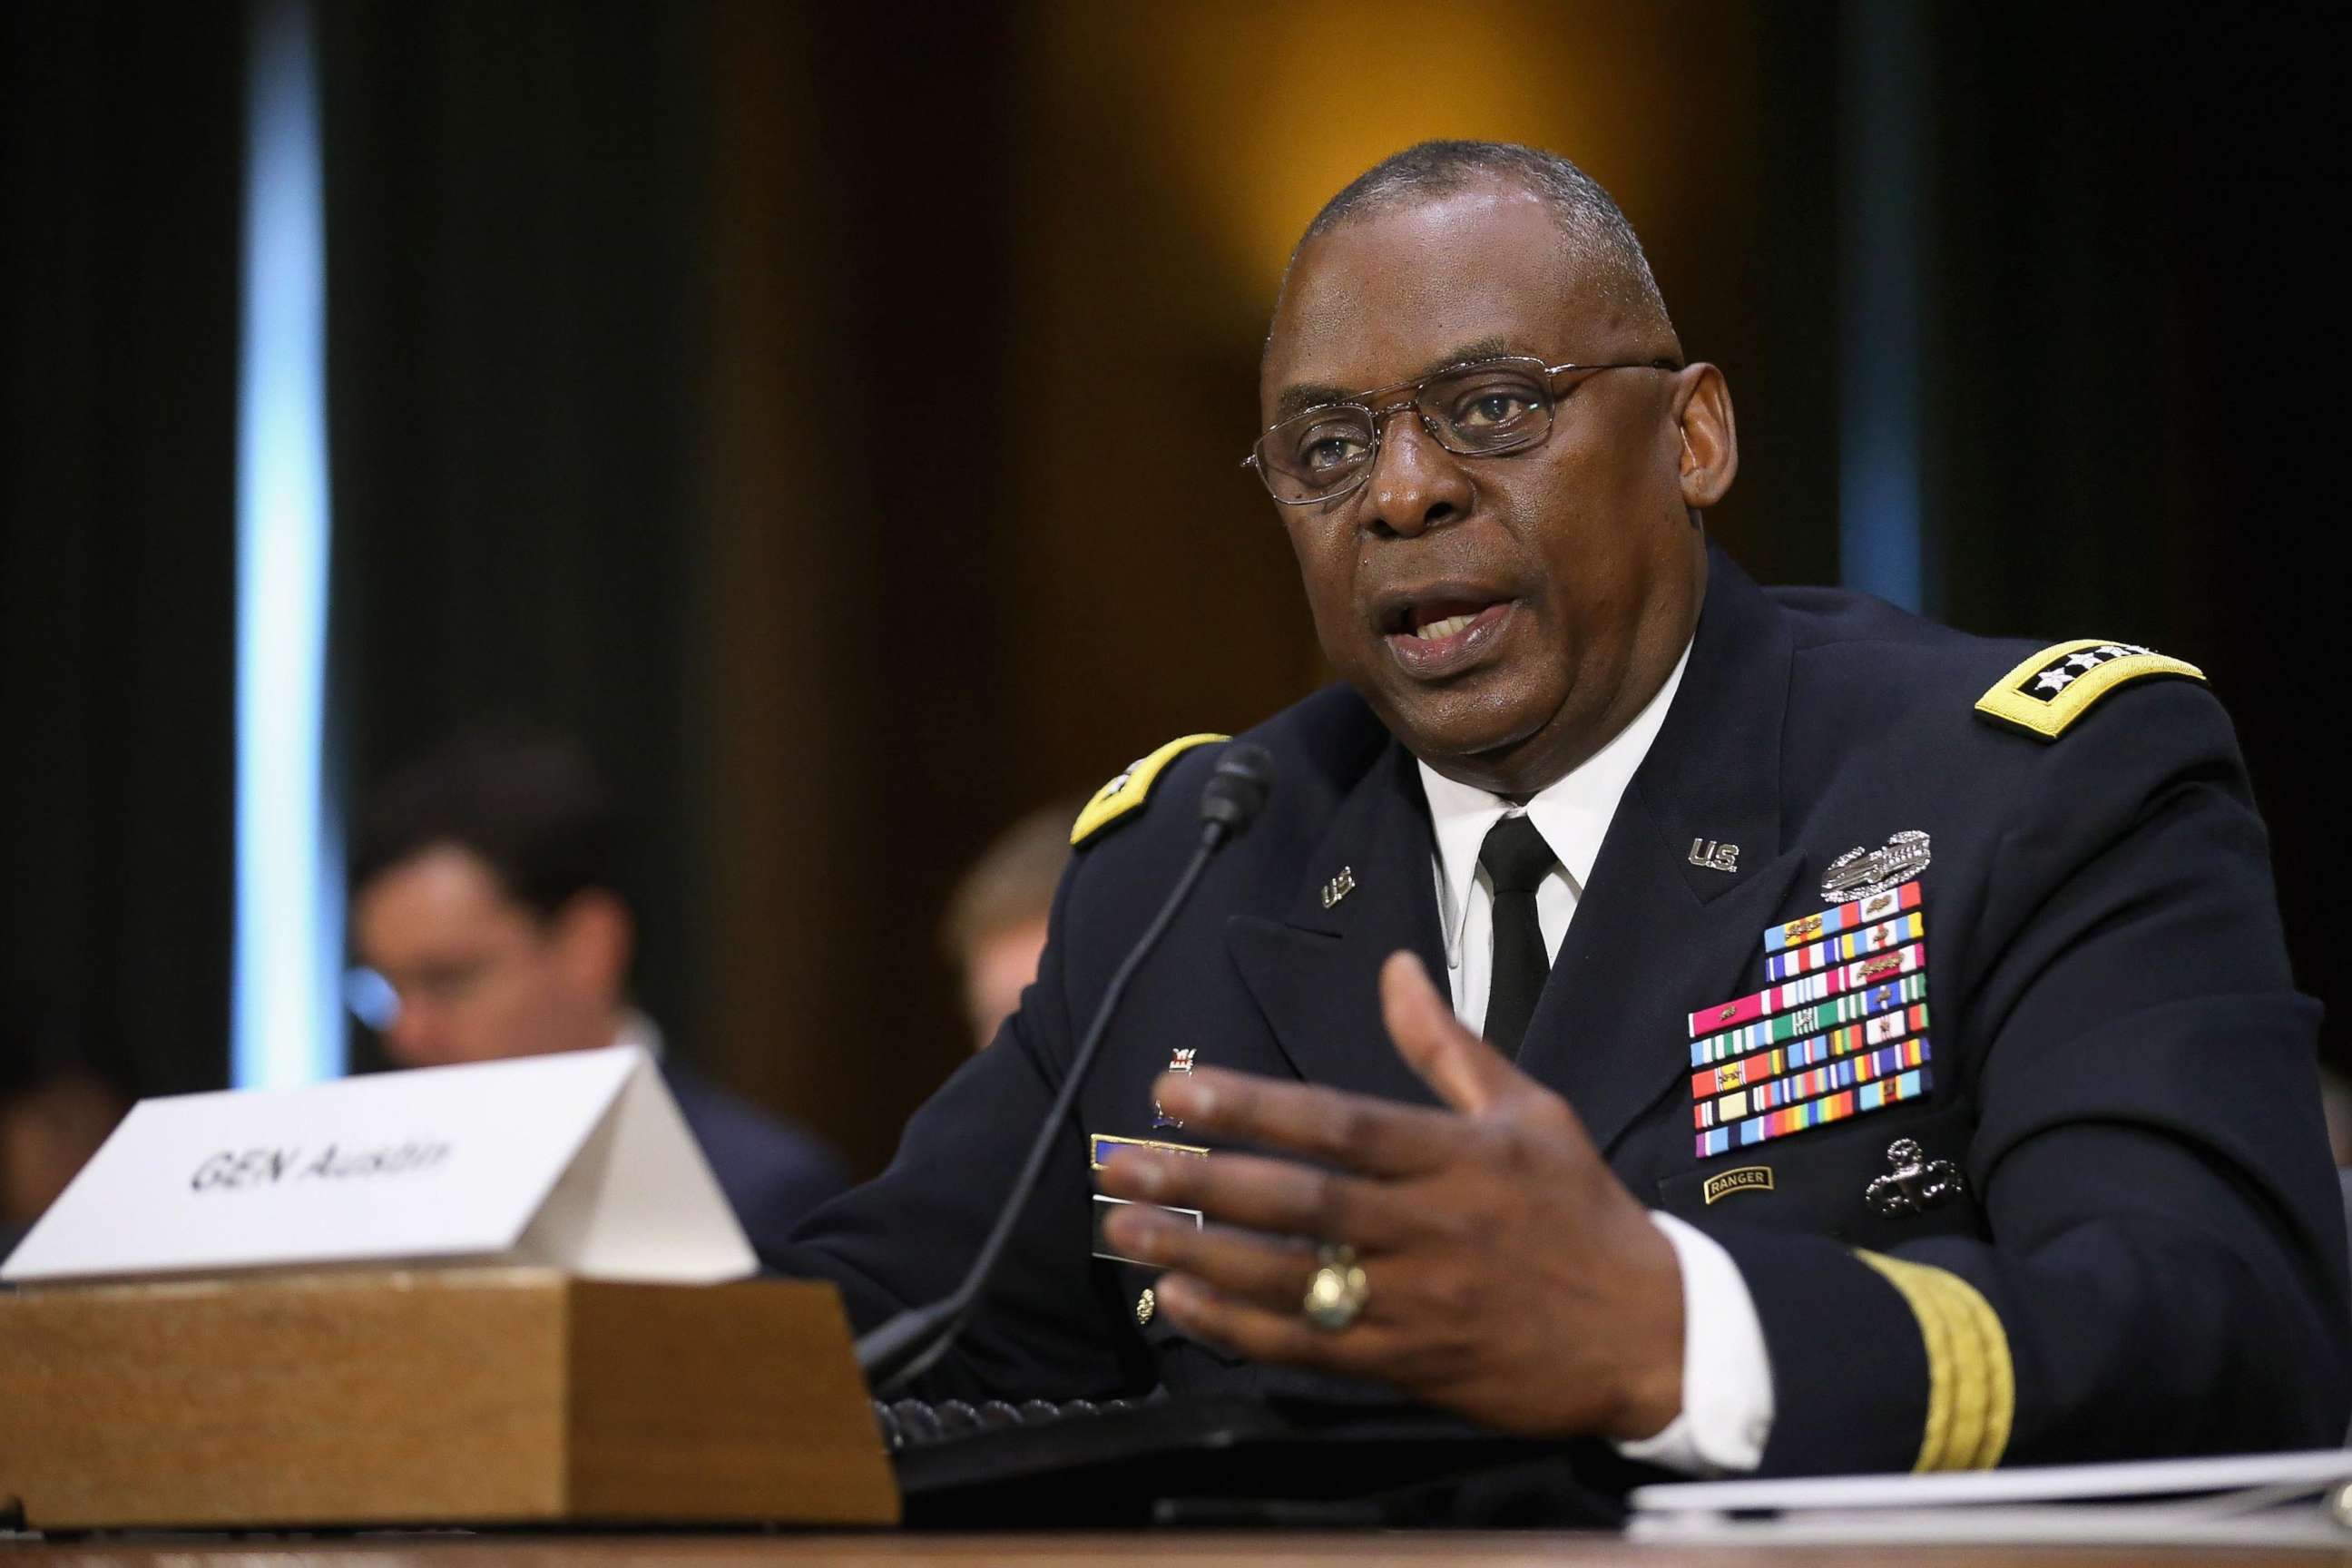 PHOTO: In this Sept. 16, 2015, file photo, Gen. Lloyd Austin III, commander of U.S. Central Command, testifies before the Senate Armed Services Committee on Capitol Hill in Washington, DC.